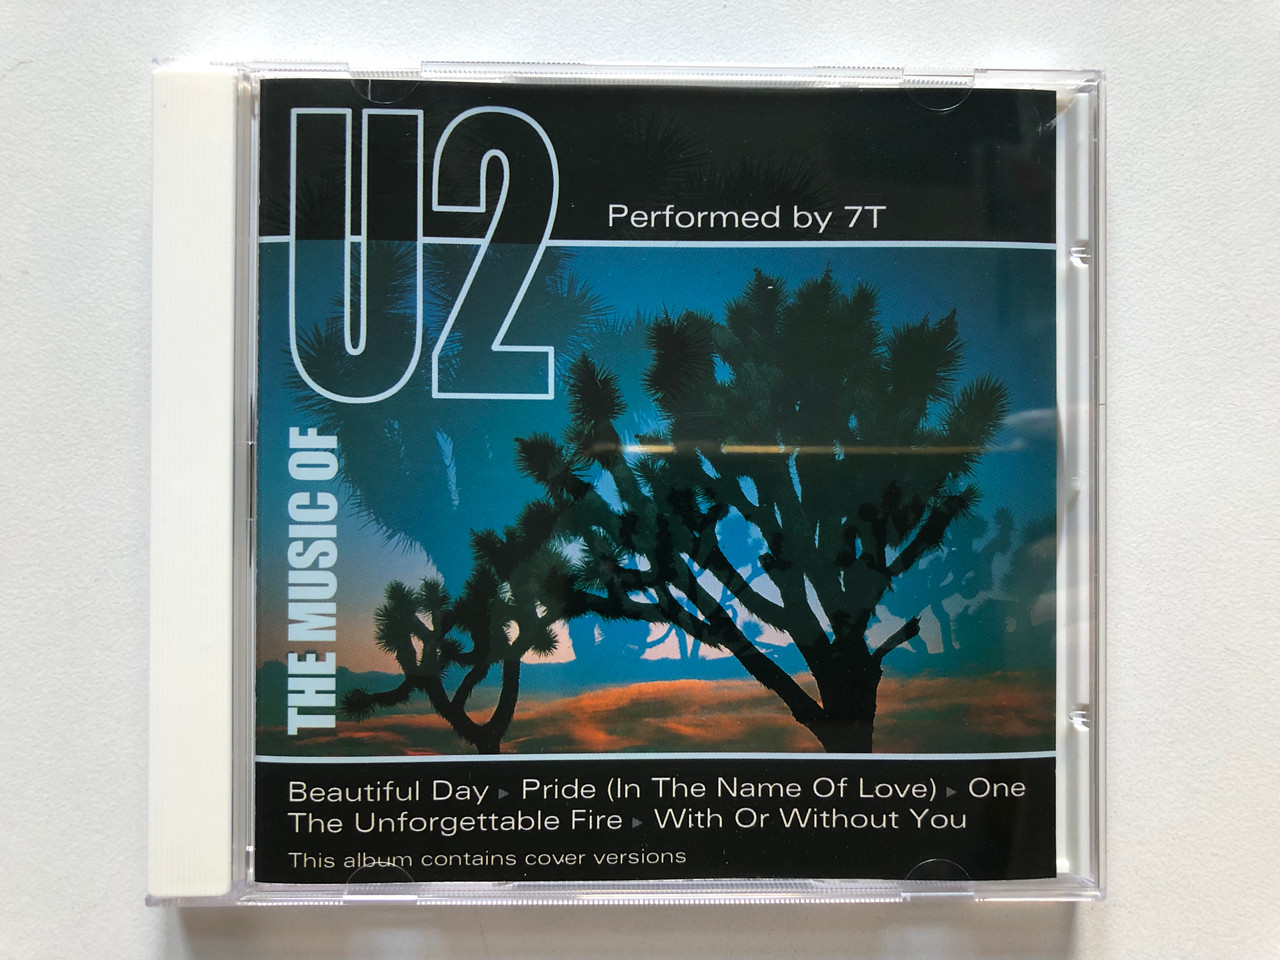 https://cdn10.bigcommerce.com/s-62bdpkt7pb/products/0/images/307514/The_Music_Of_U2_-_Performed_By_7T_Beautiful_Day_Pride_In_The_Name_Of_Love_One_The_Unforgettable_Fire_With_Or_Without_You_This_album_contains_cover_versions_Millennium_Gold_Audio_CD_2_1__09210.1698730980.1280.1280.JPG?c=2